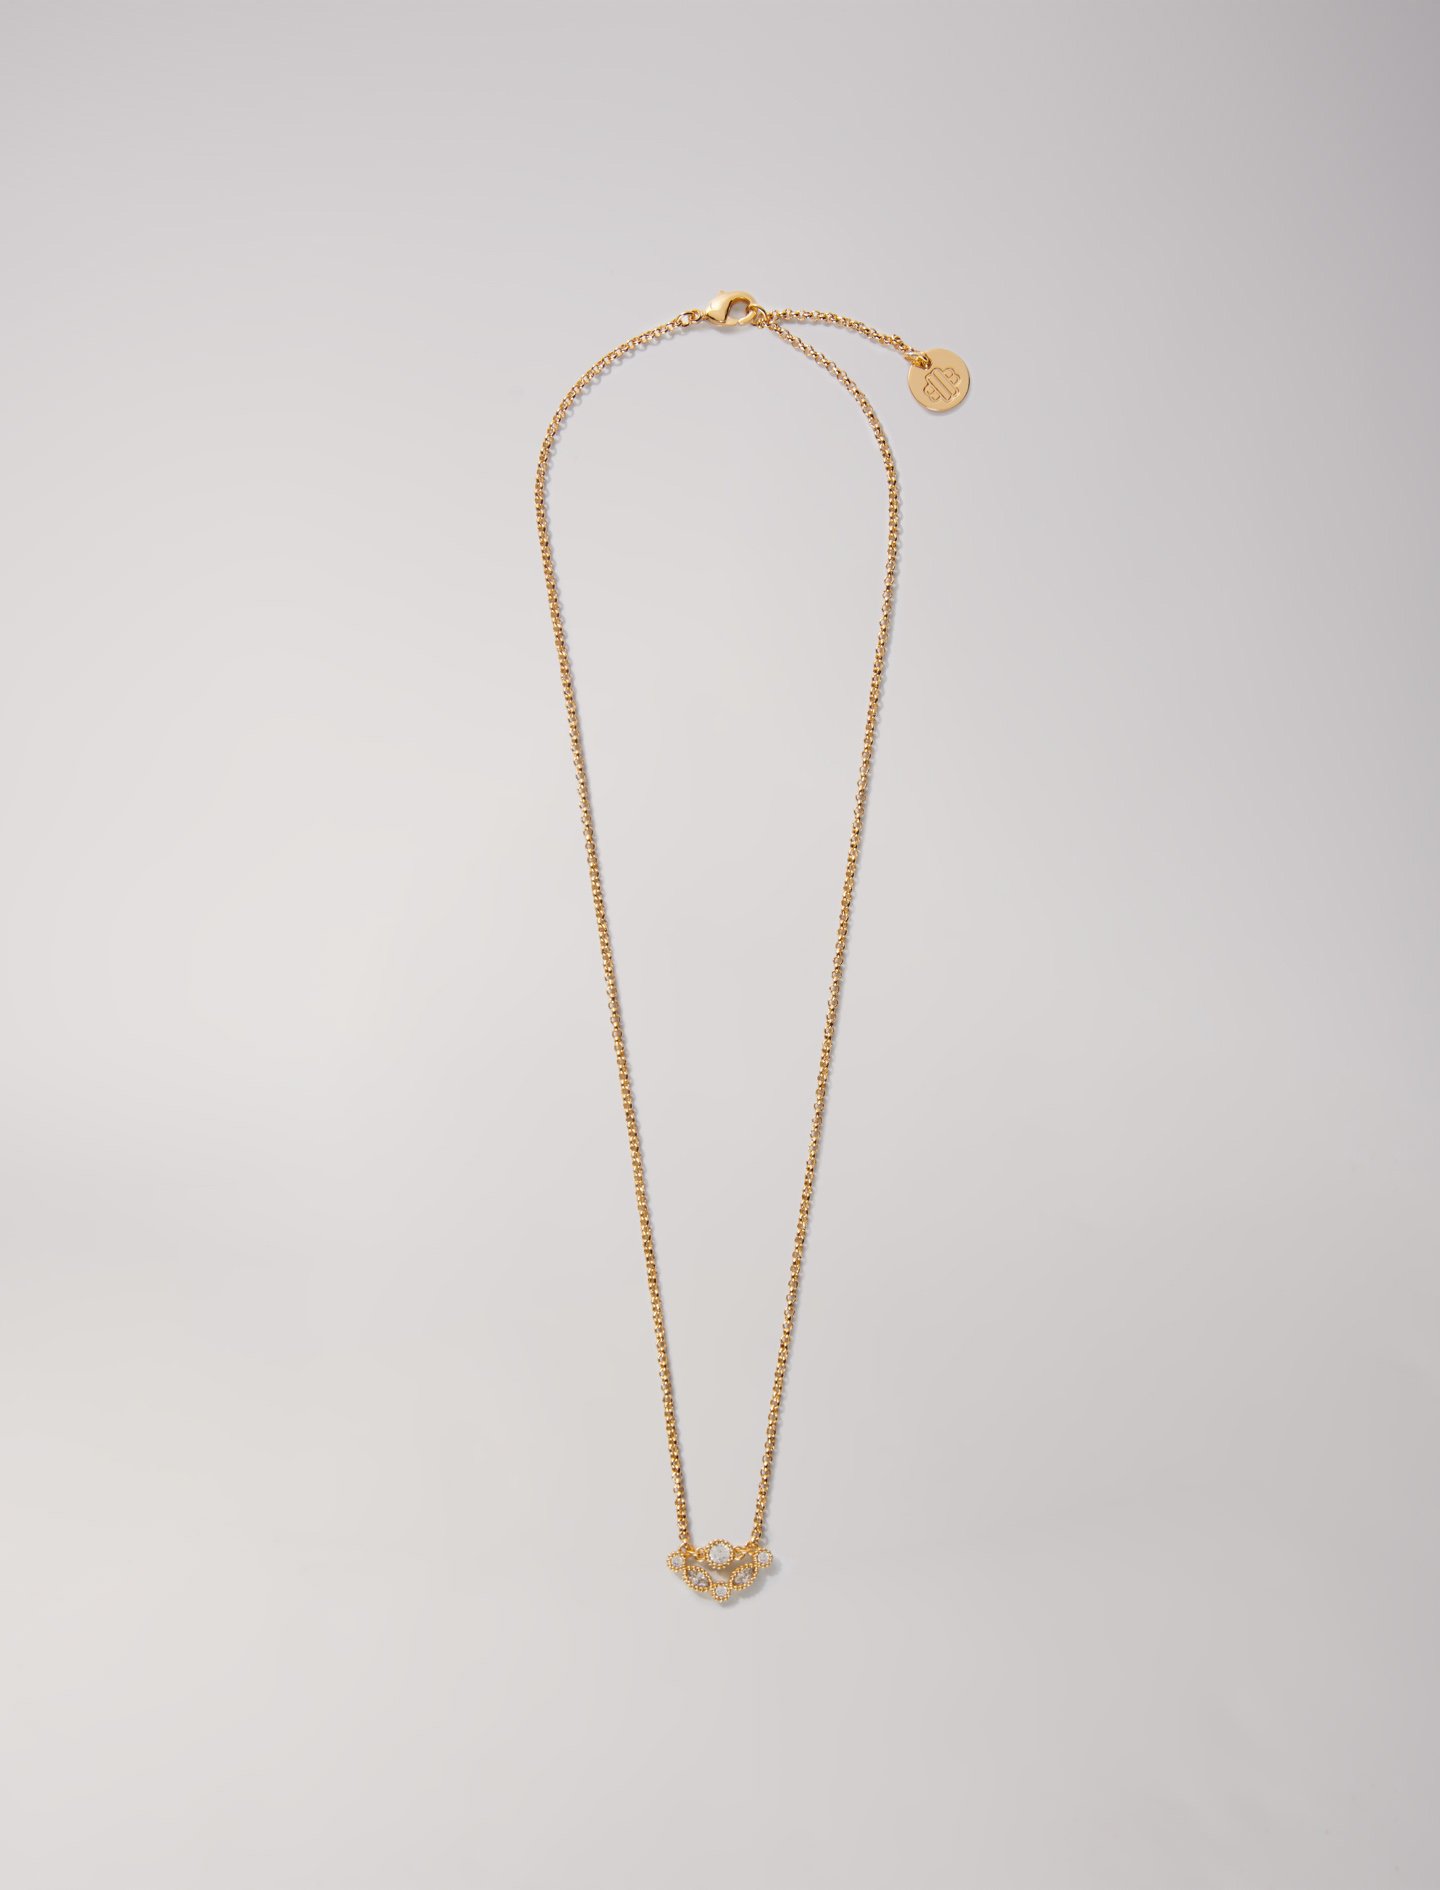 Mixte's zirconium oxide Jewellery: Gold-tone necklace with rhinestones, size Mixte-Jewelry-OS (ONE SIZE), in color Gold / Yellow